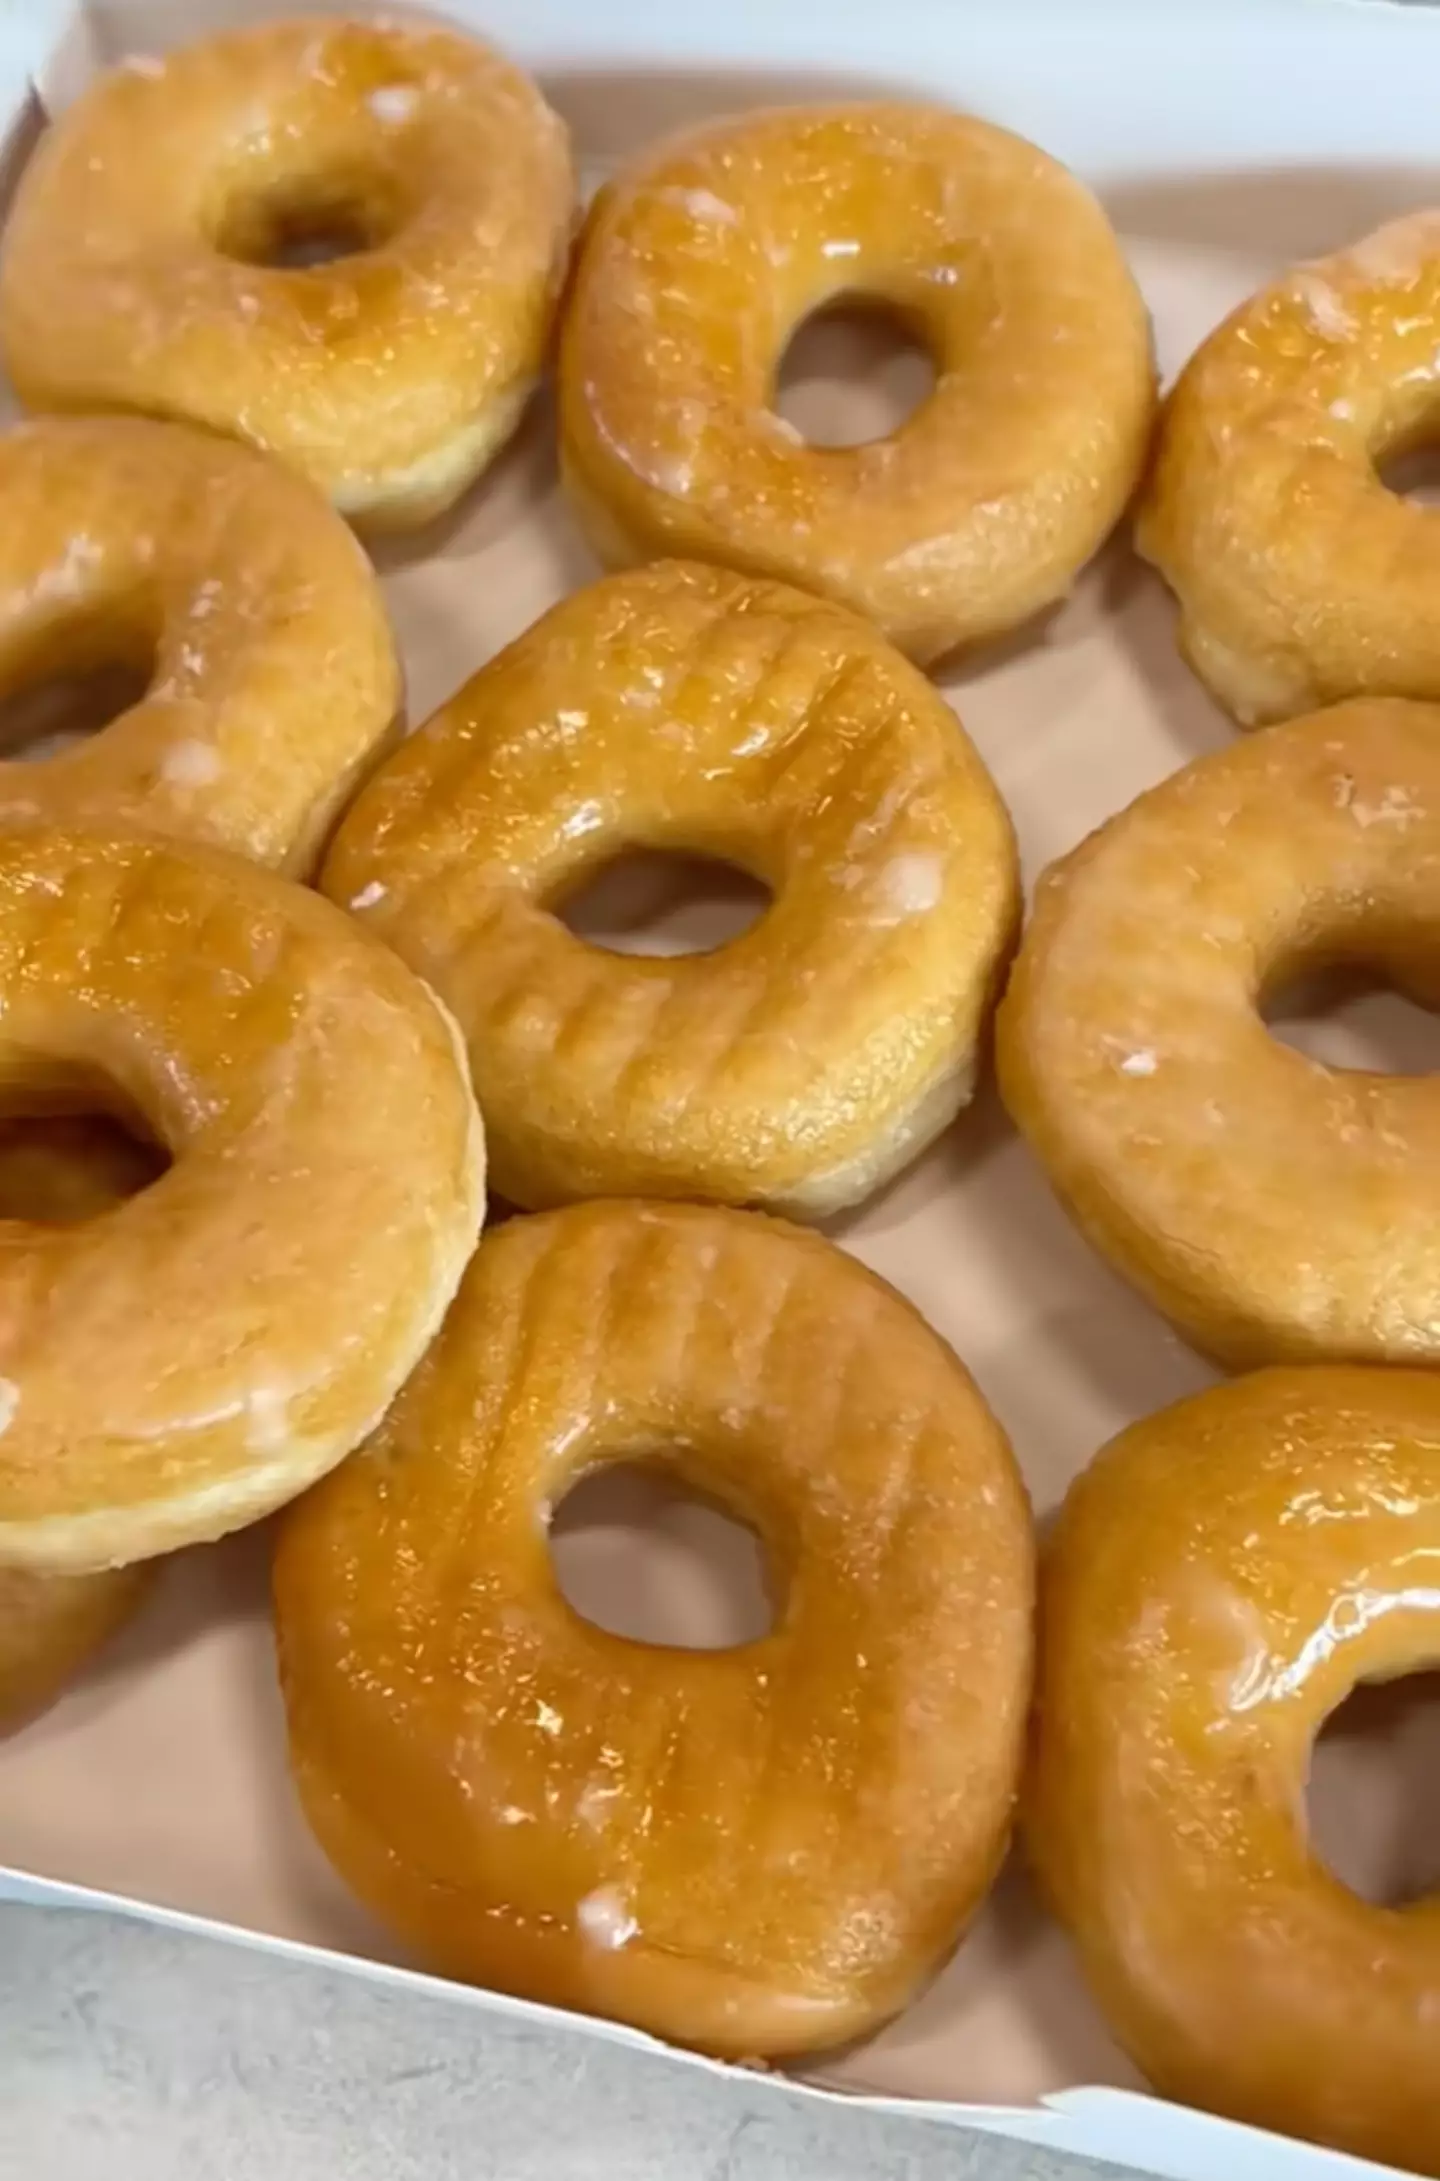 The sugar in the pumpkin drink amounts to 14 glazed donuts, according to the TikToker.